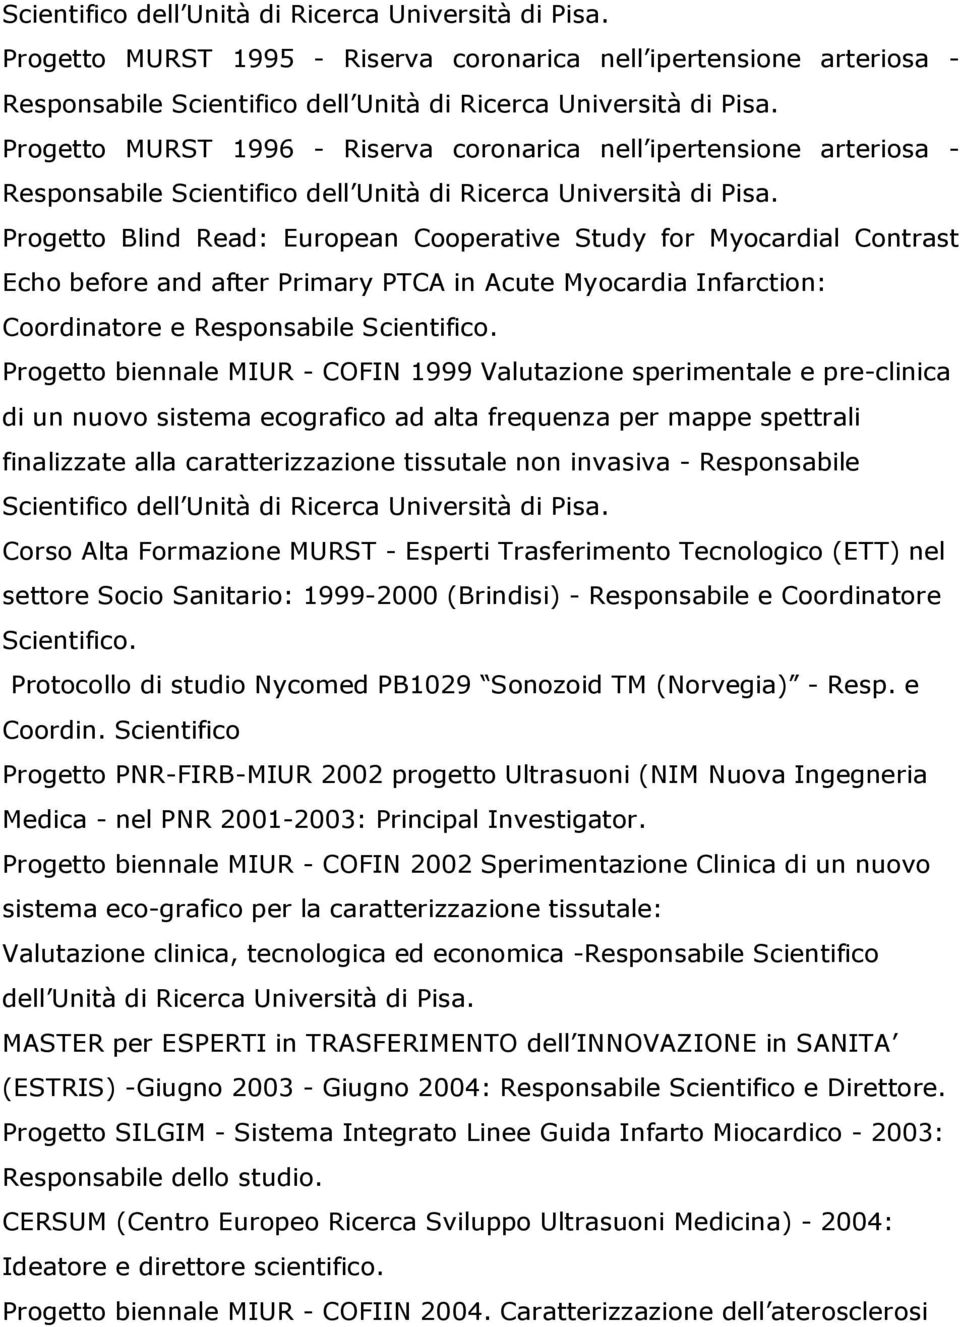 Progetto Blind Read: European Cooperative Study for Myocardial Contrast Echo before and after Primary PTCA in Acute Myocardia Infarction: Coordinatore e Responsabile Scientifico.